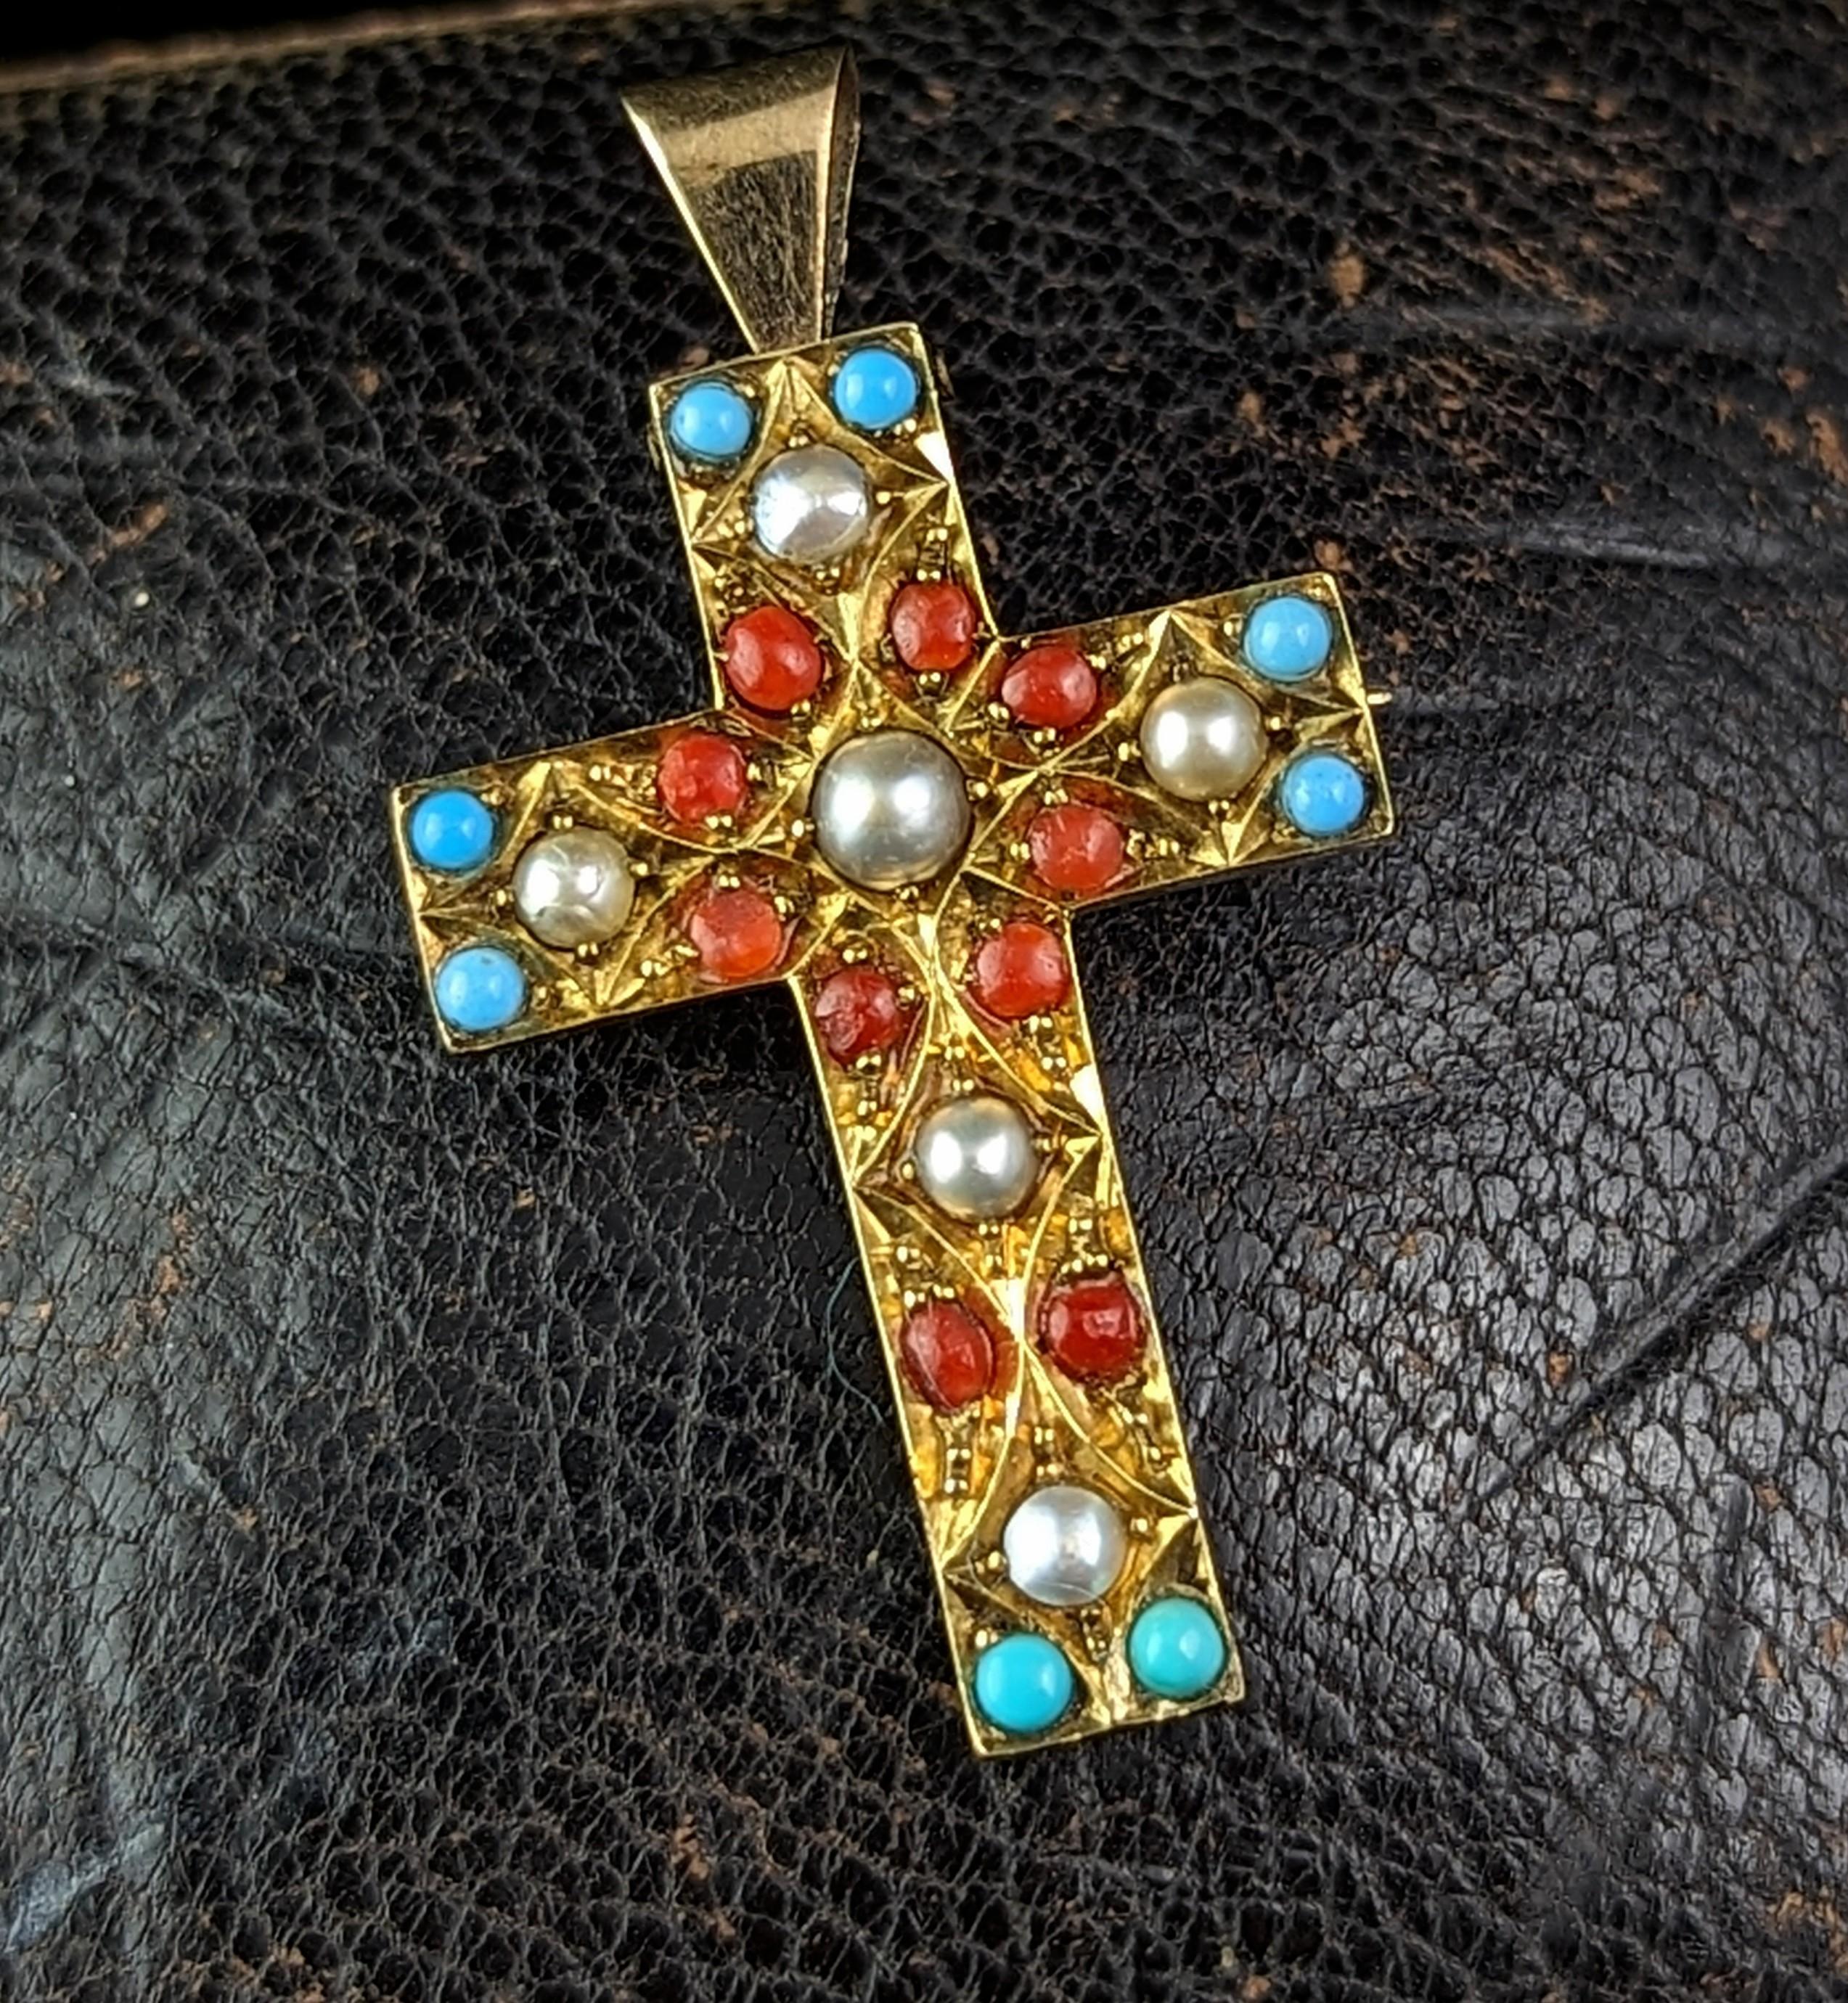 A magical antique Victorian era cross pendant brooch.

The cross has an engraved front and is adorned with creamy seed pearl along with coral and turquoise coloured paste stones.

It has an unusual and vibrant style which really makes it stand out